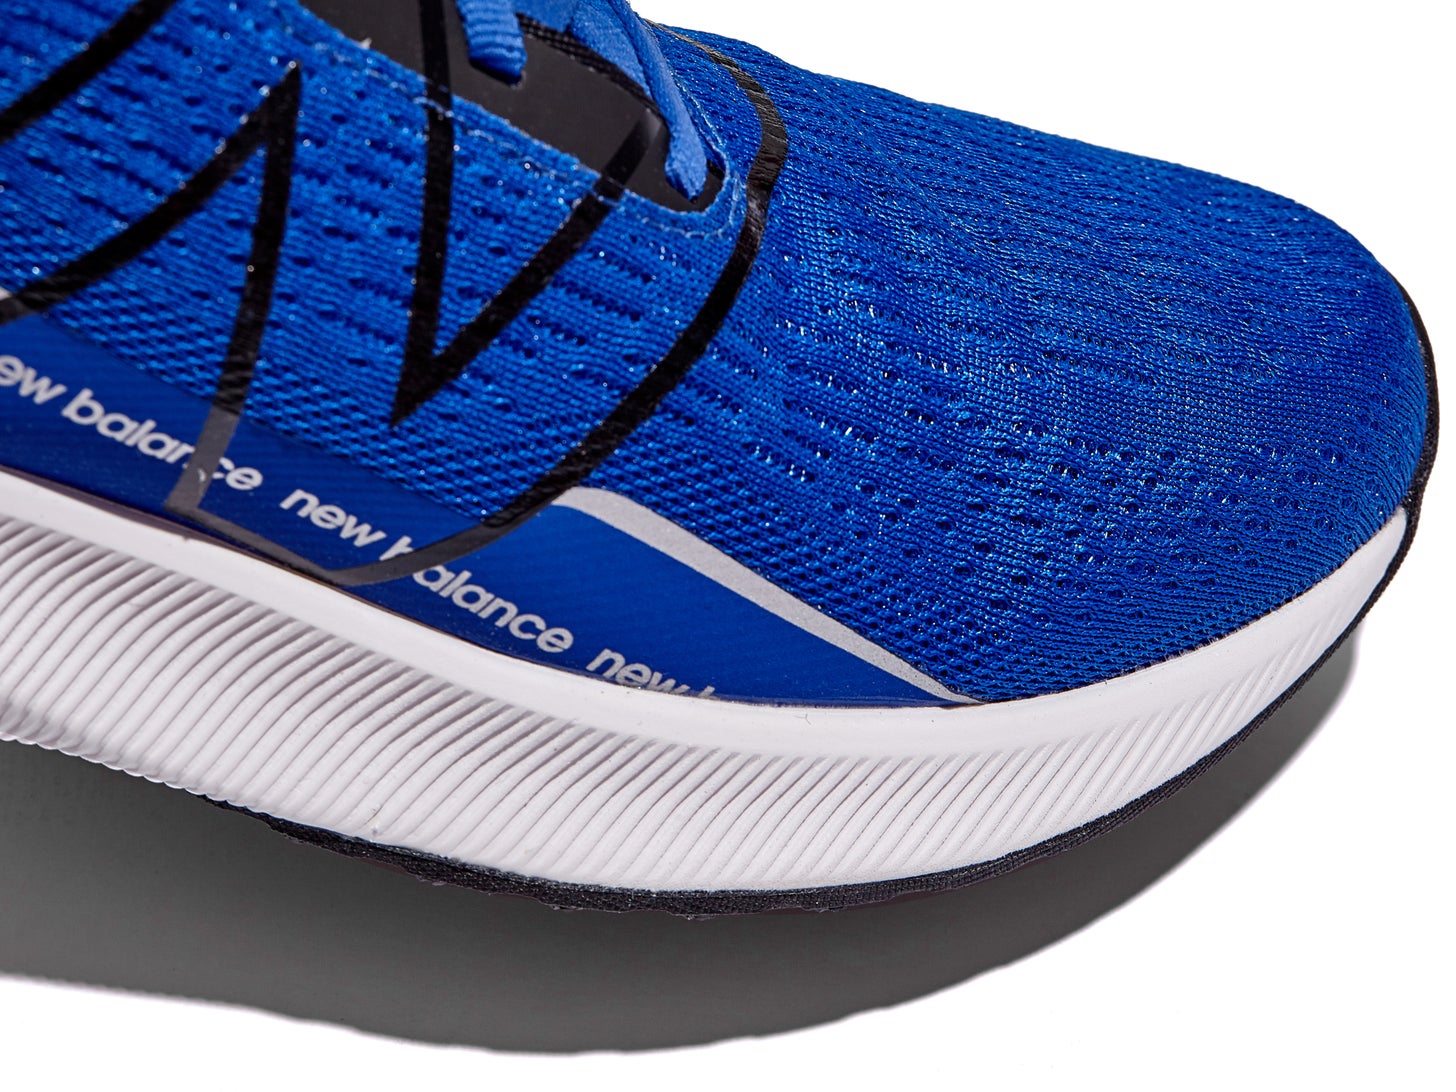 New Balance FuelCell Propel v2 Shoe Review | Running Warehouse Australia